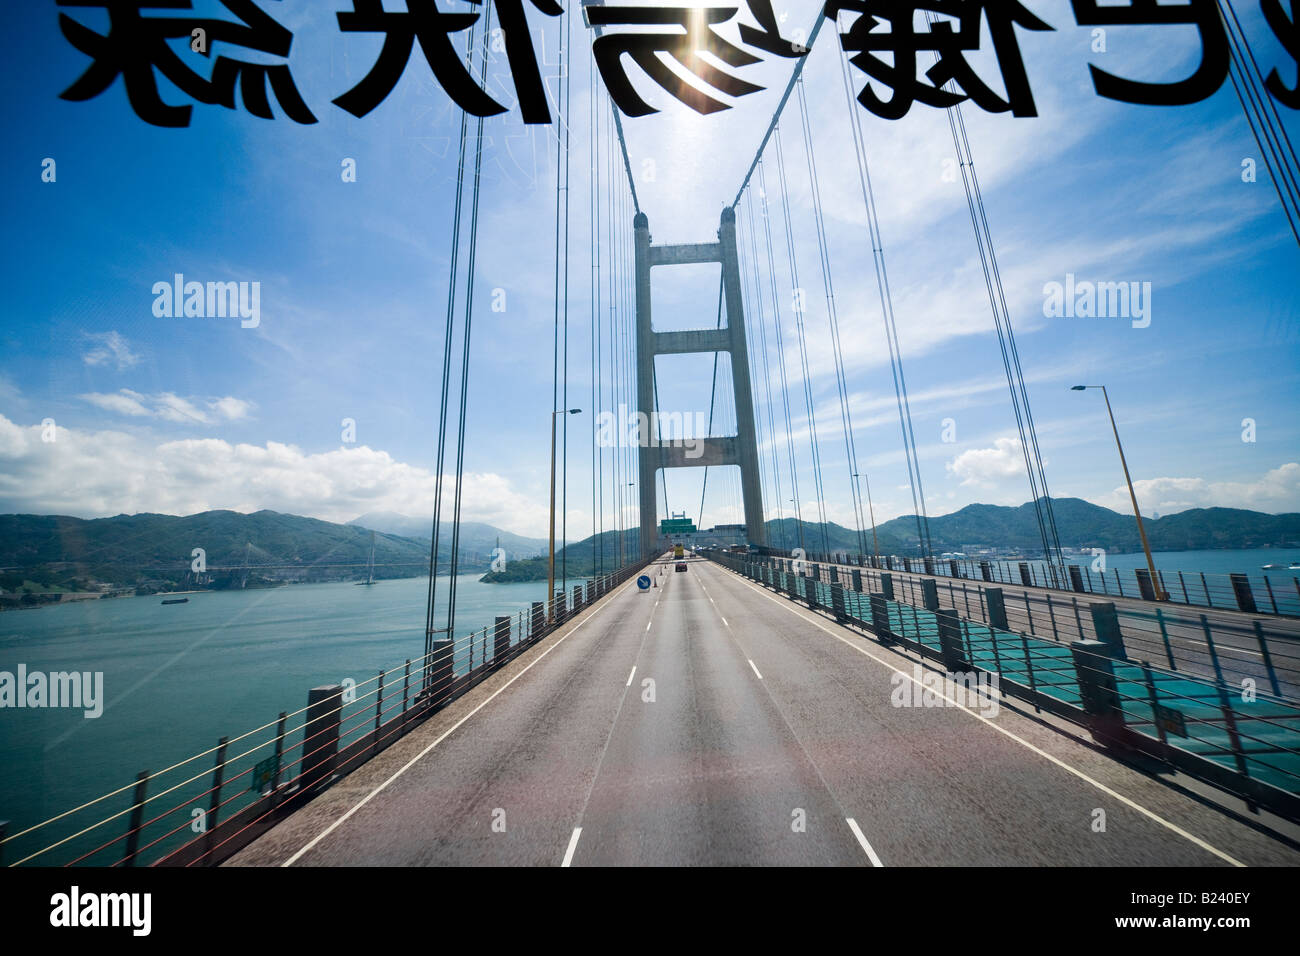 Hong Kong Tsing Ma Bridge seen through the windshield from the upper level of a double-decked bus Stock Photo